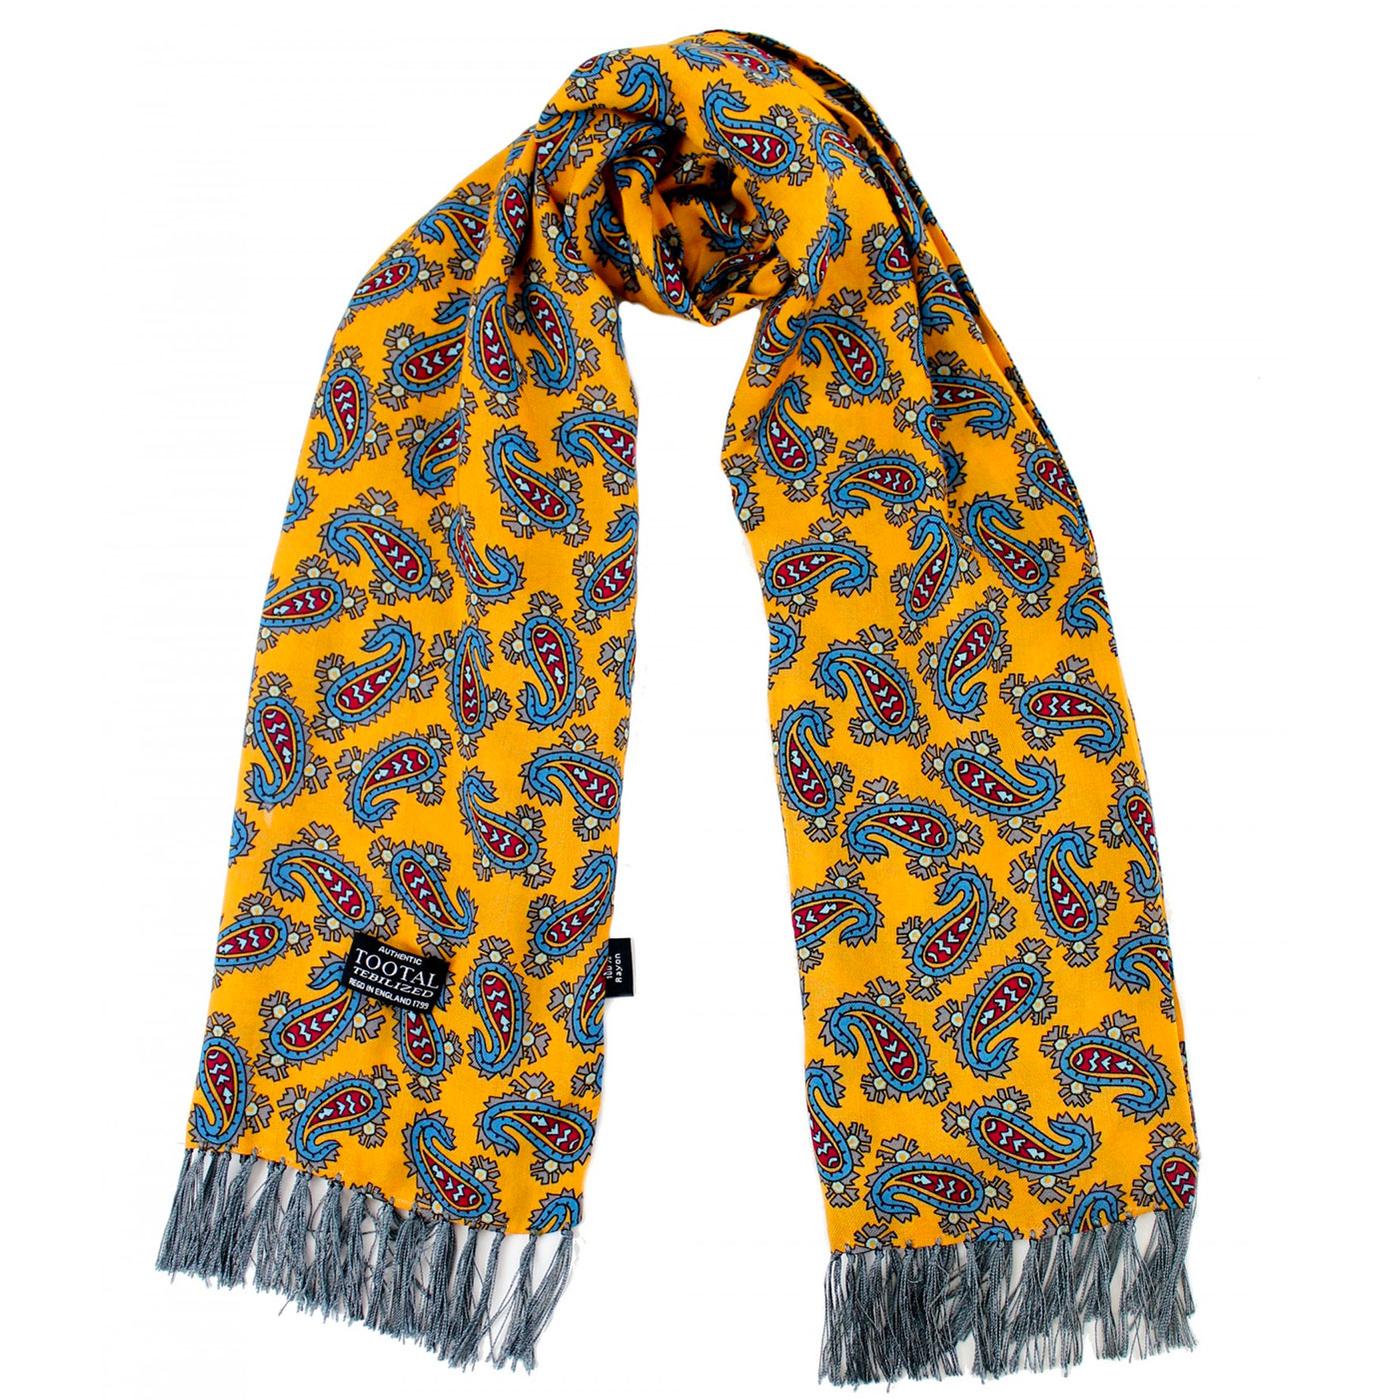 TOOTAL Retro Mod 60s Paisley Rayon Scarf in Yellow